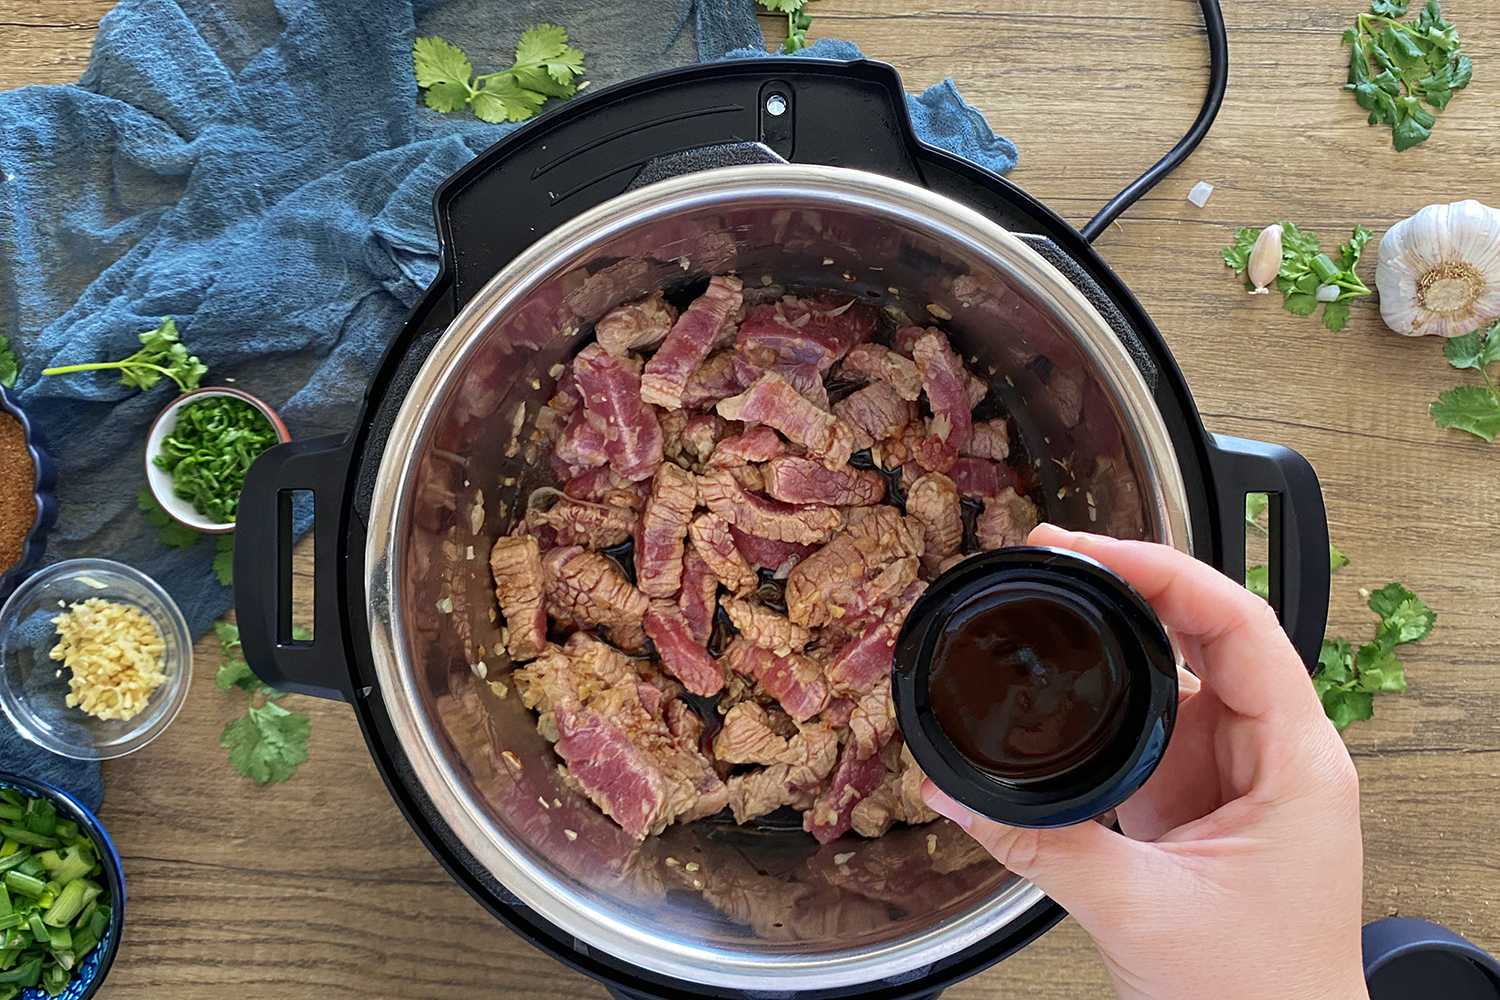 How To Cook Meat In An Electric Pressure Cooker